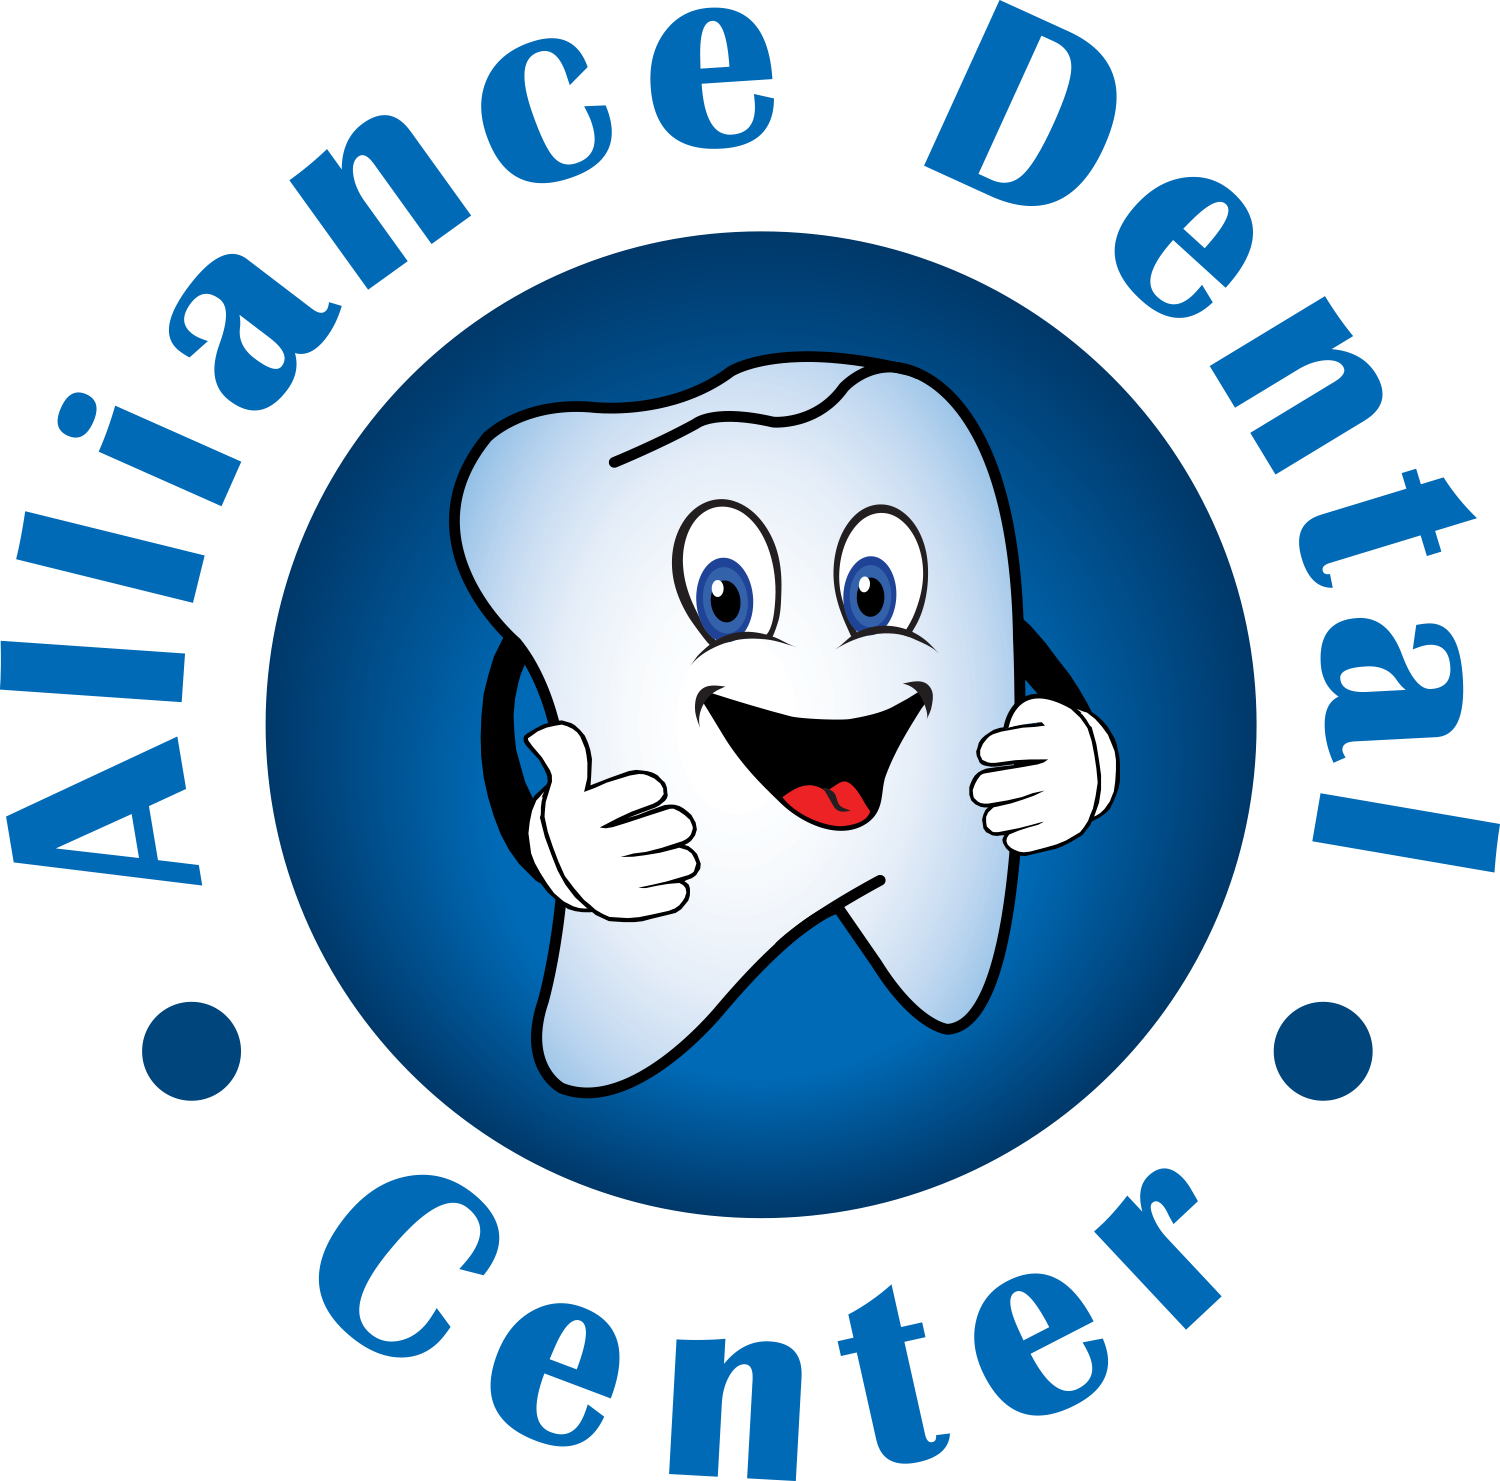 Alliance Dental Center : Dentists in Jackson Heights, Queens NY 11372 | 718-424-7100